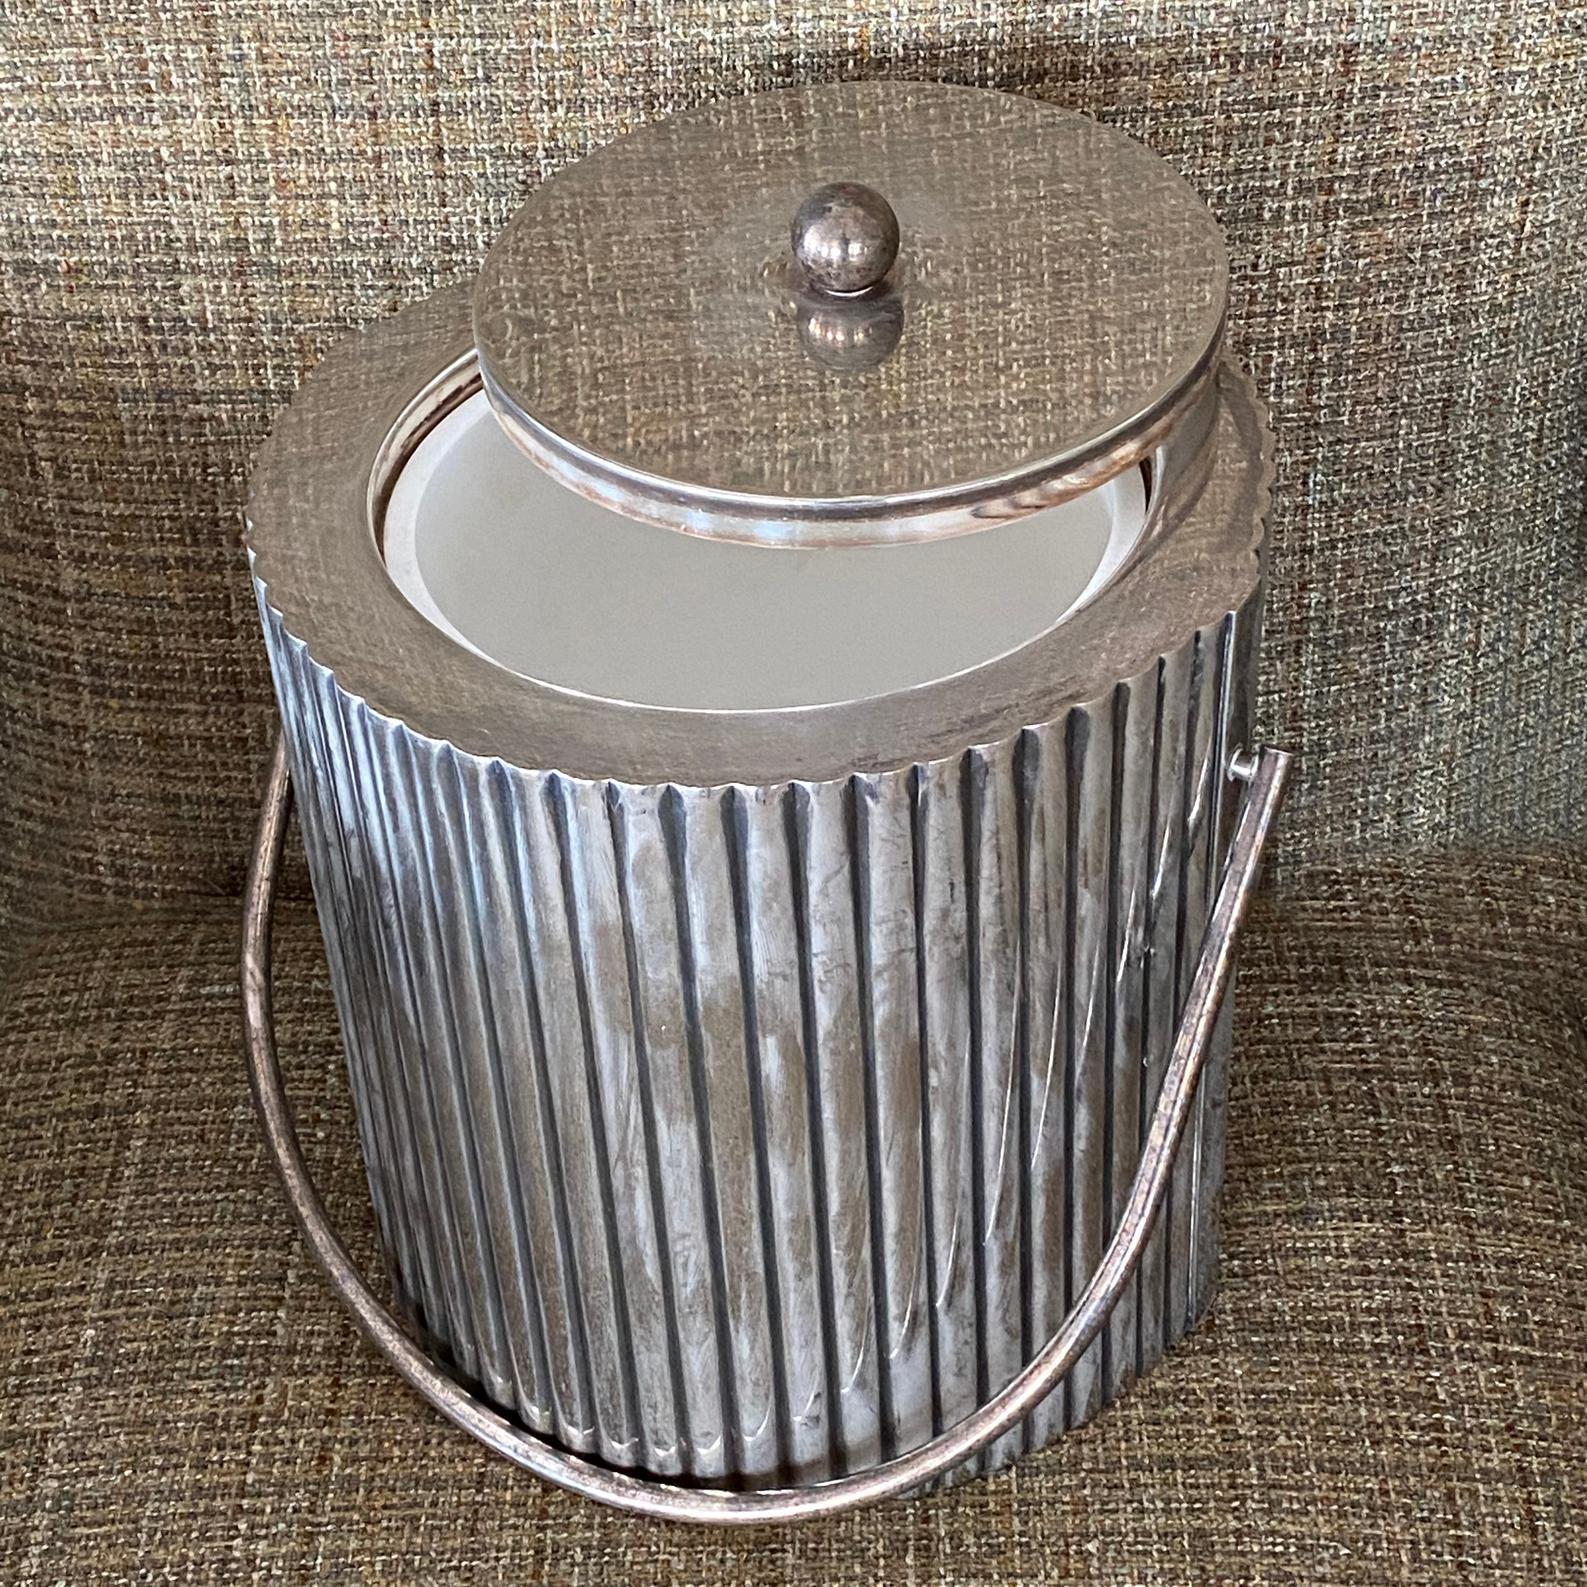 Handcrafted Secessionist Style Silver-Plated Ice Bucket from Cassetti, 1960s For Sale 2